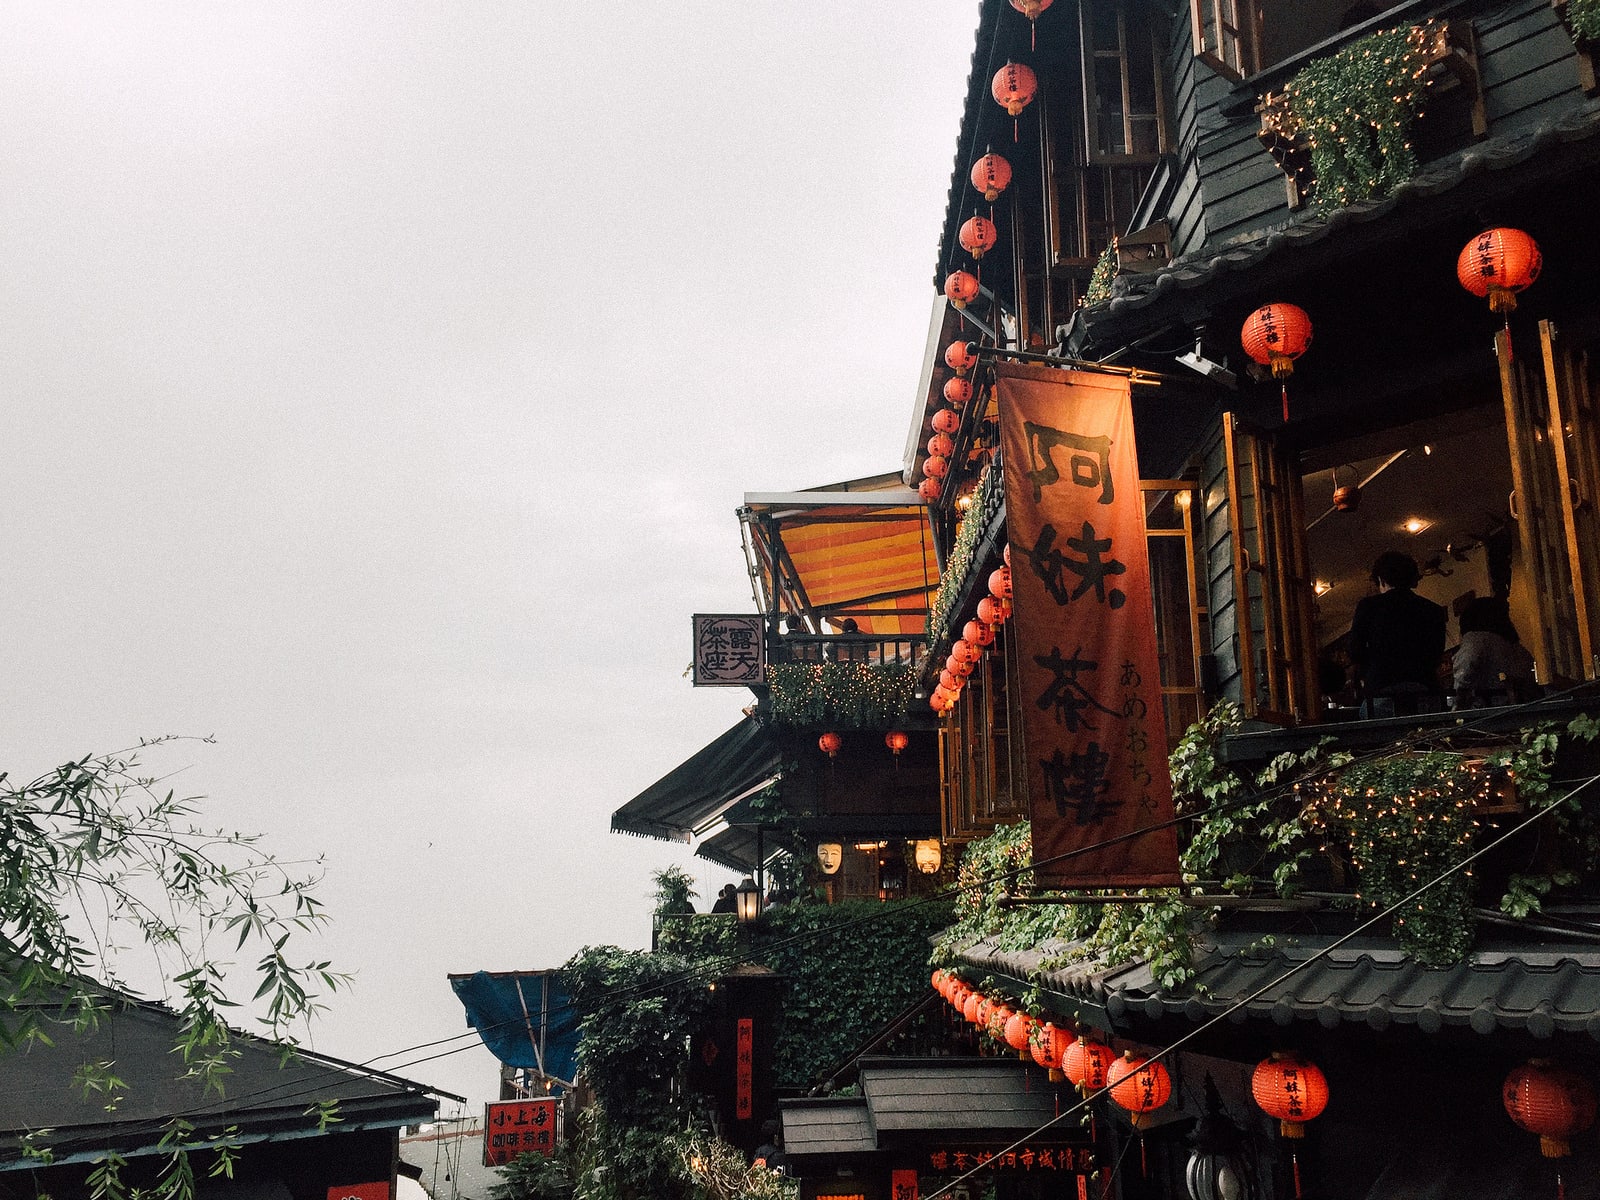 Jiufen 九份, the town that inspired Spirited Away